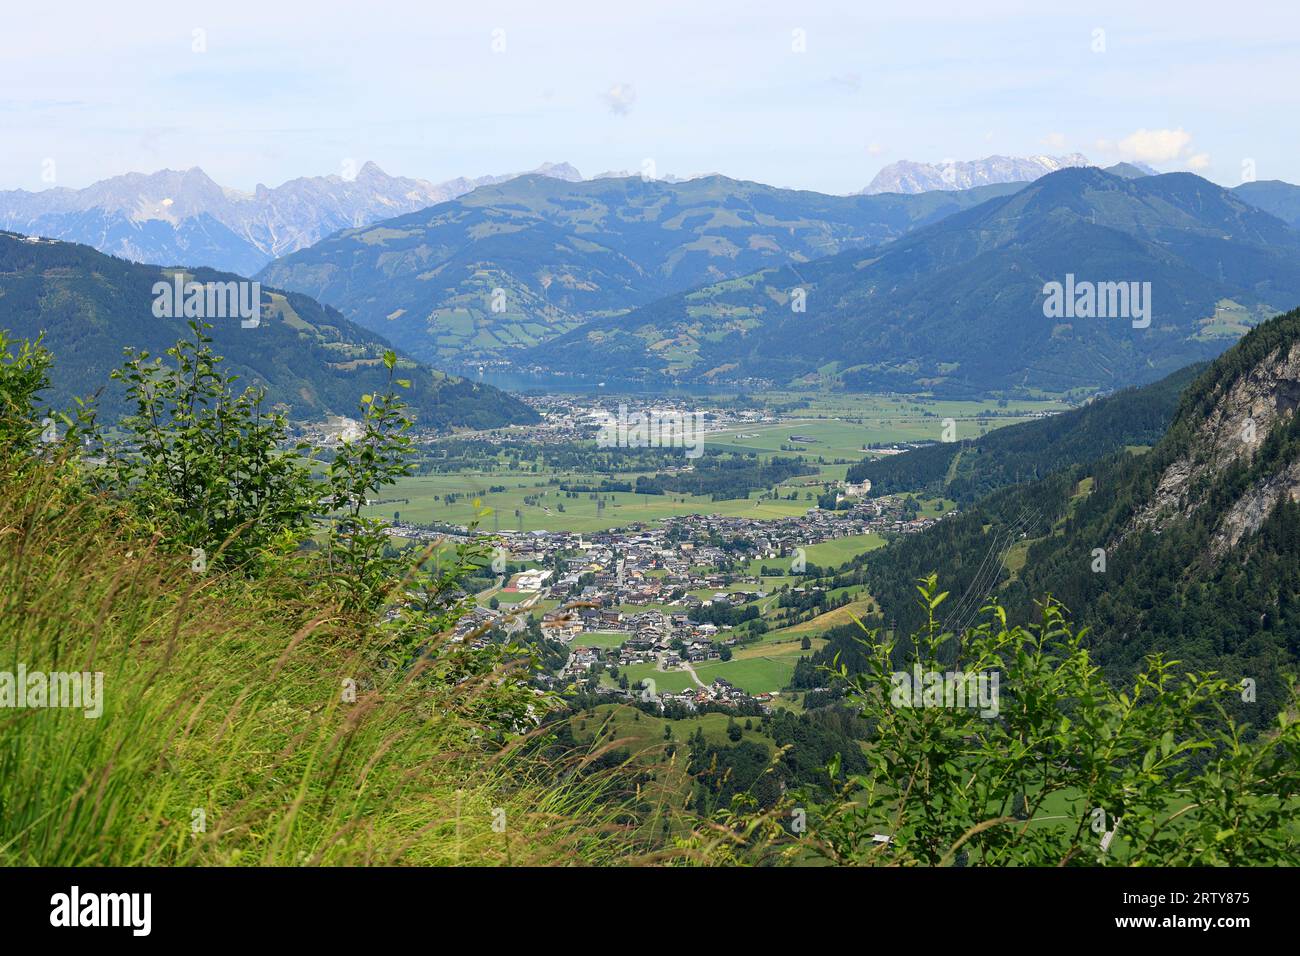 View of the town of Kaprun in the Salzburger Land in Austria Stock Photo